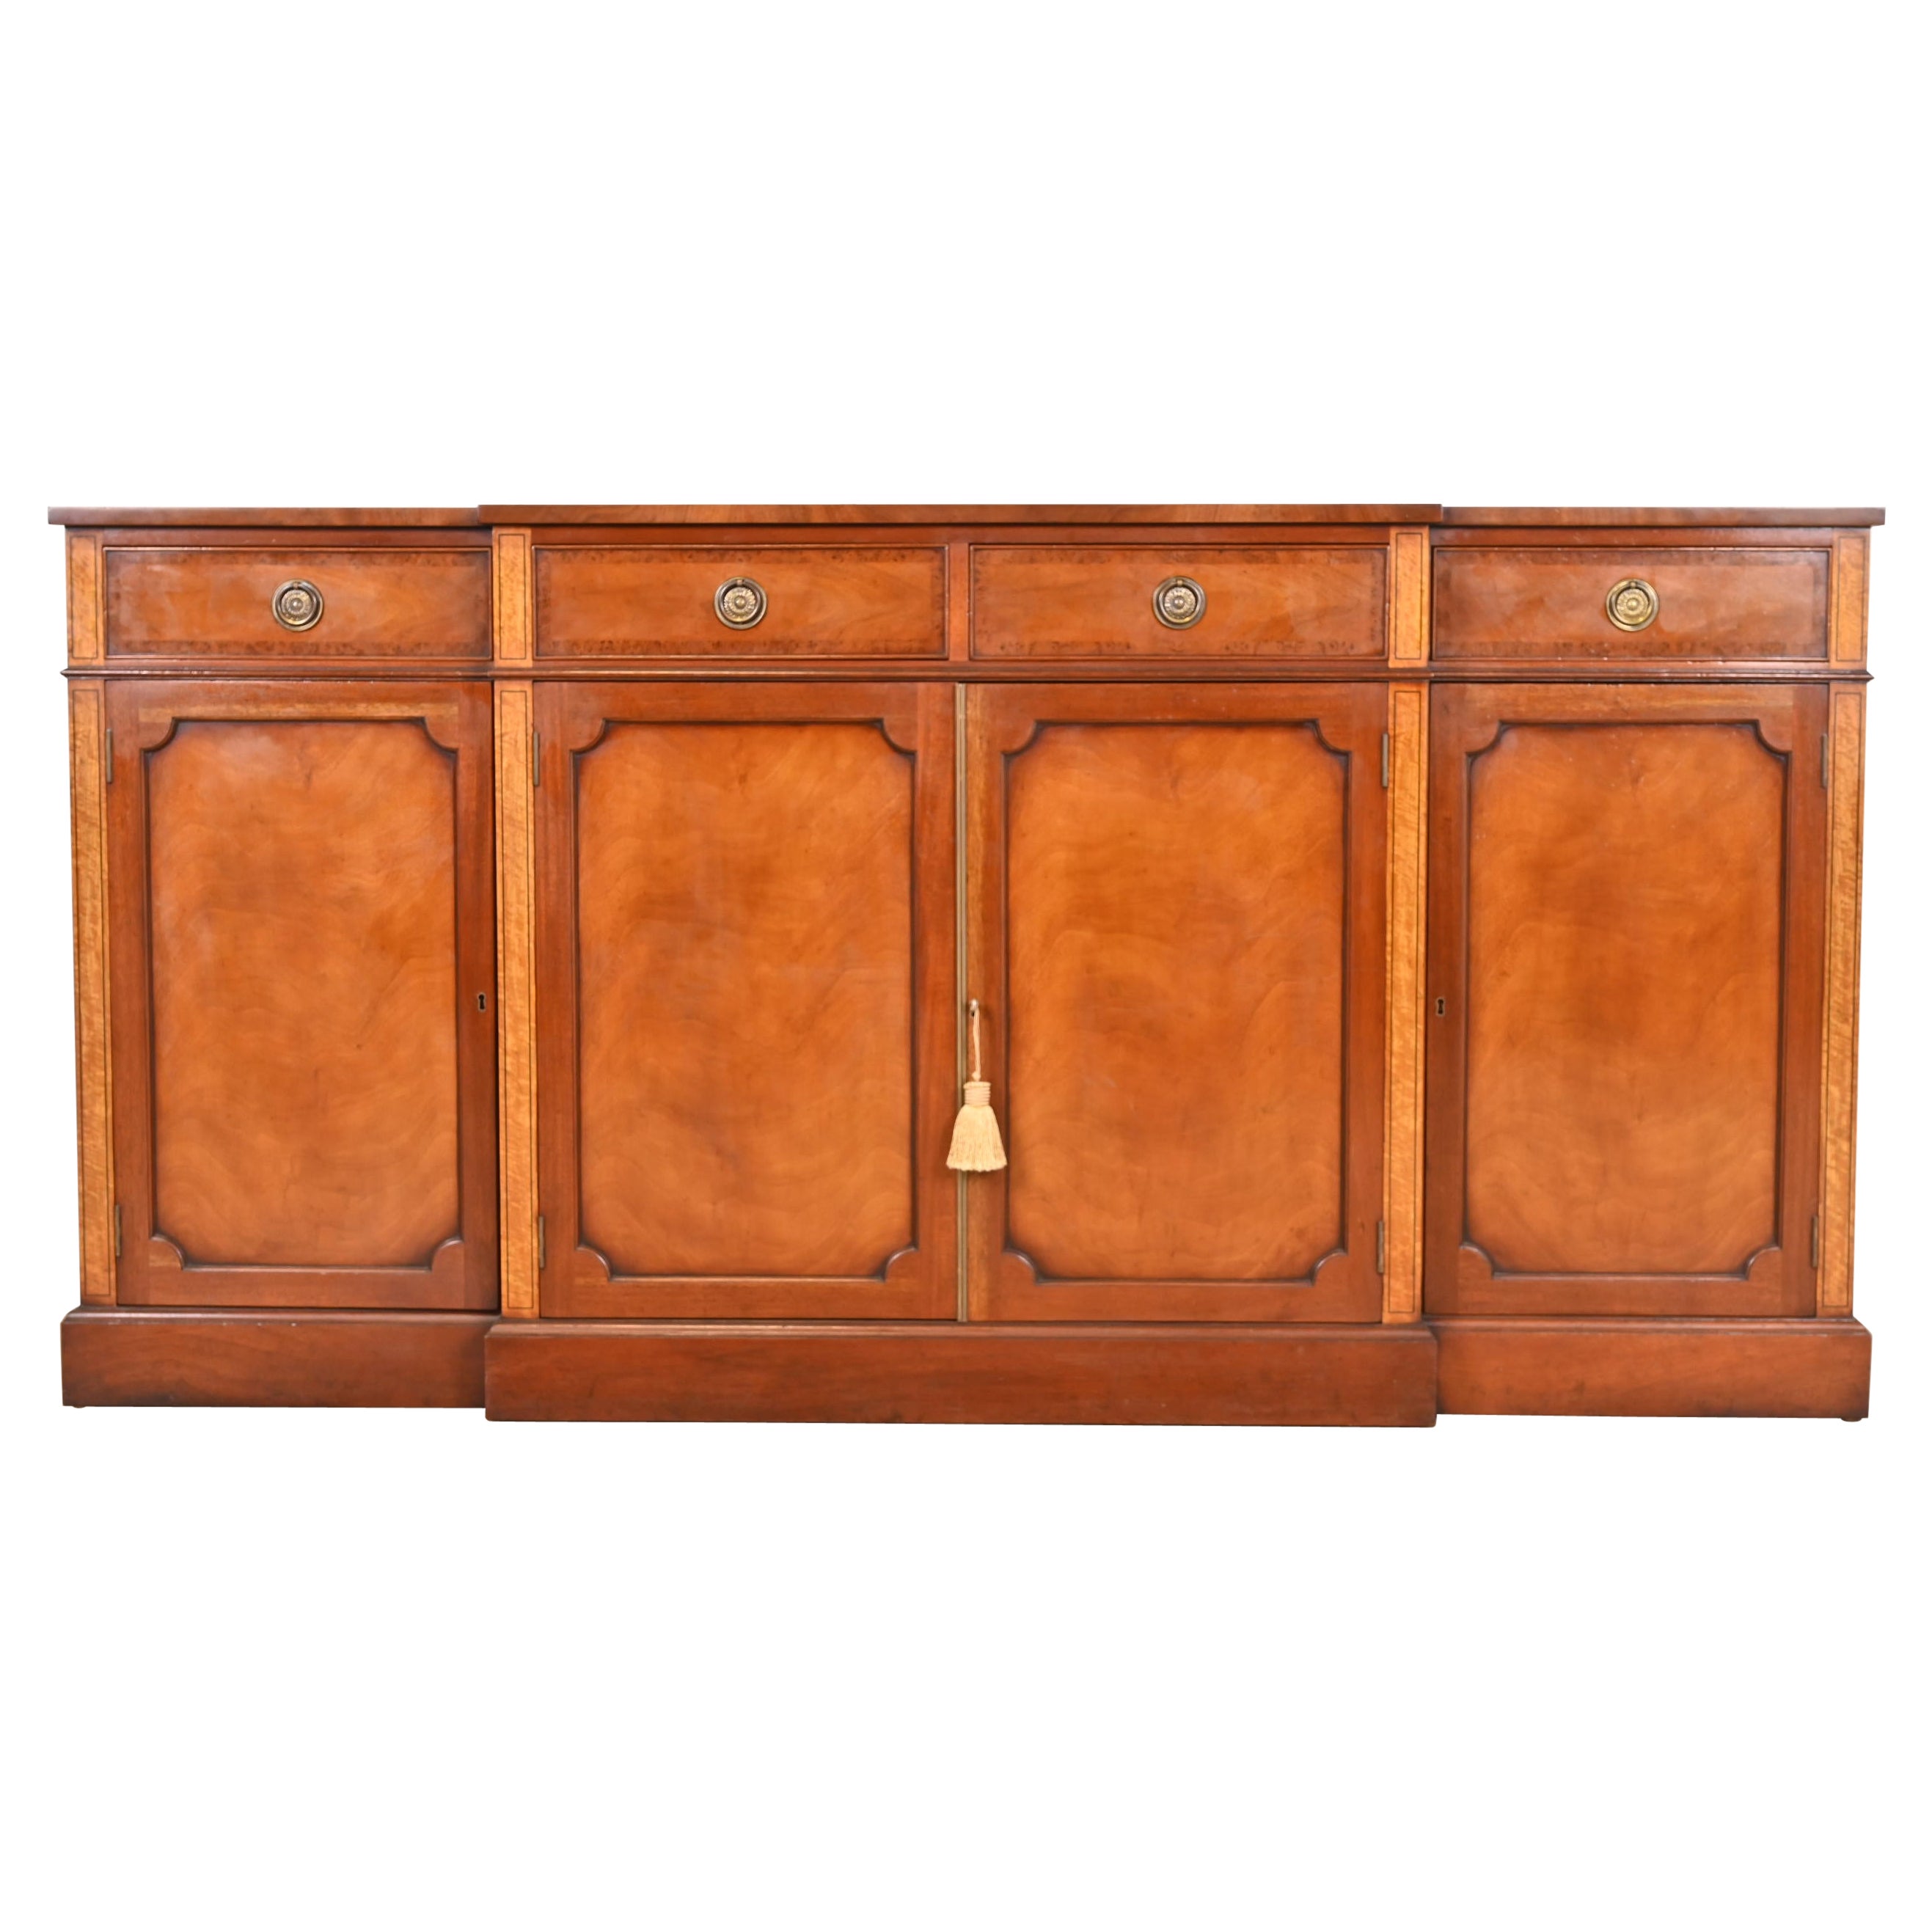 English Georgian Banded Mahogany Sideboard by Restall Brown & Clennell For Sale